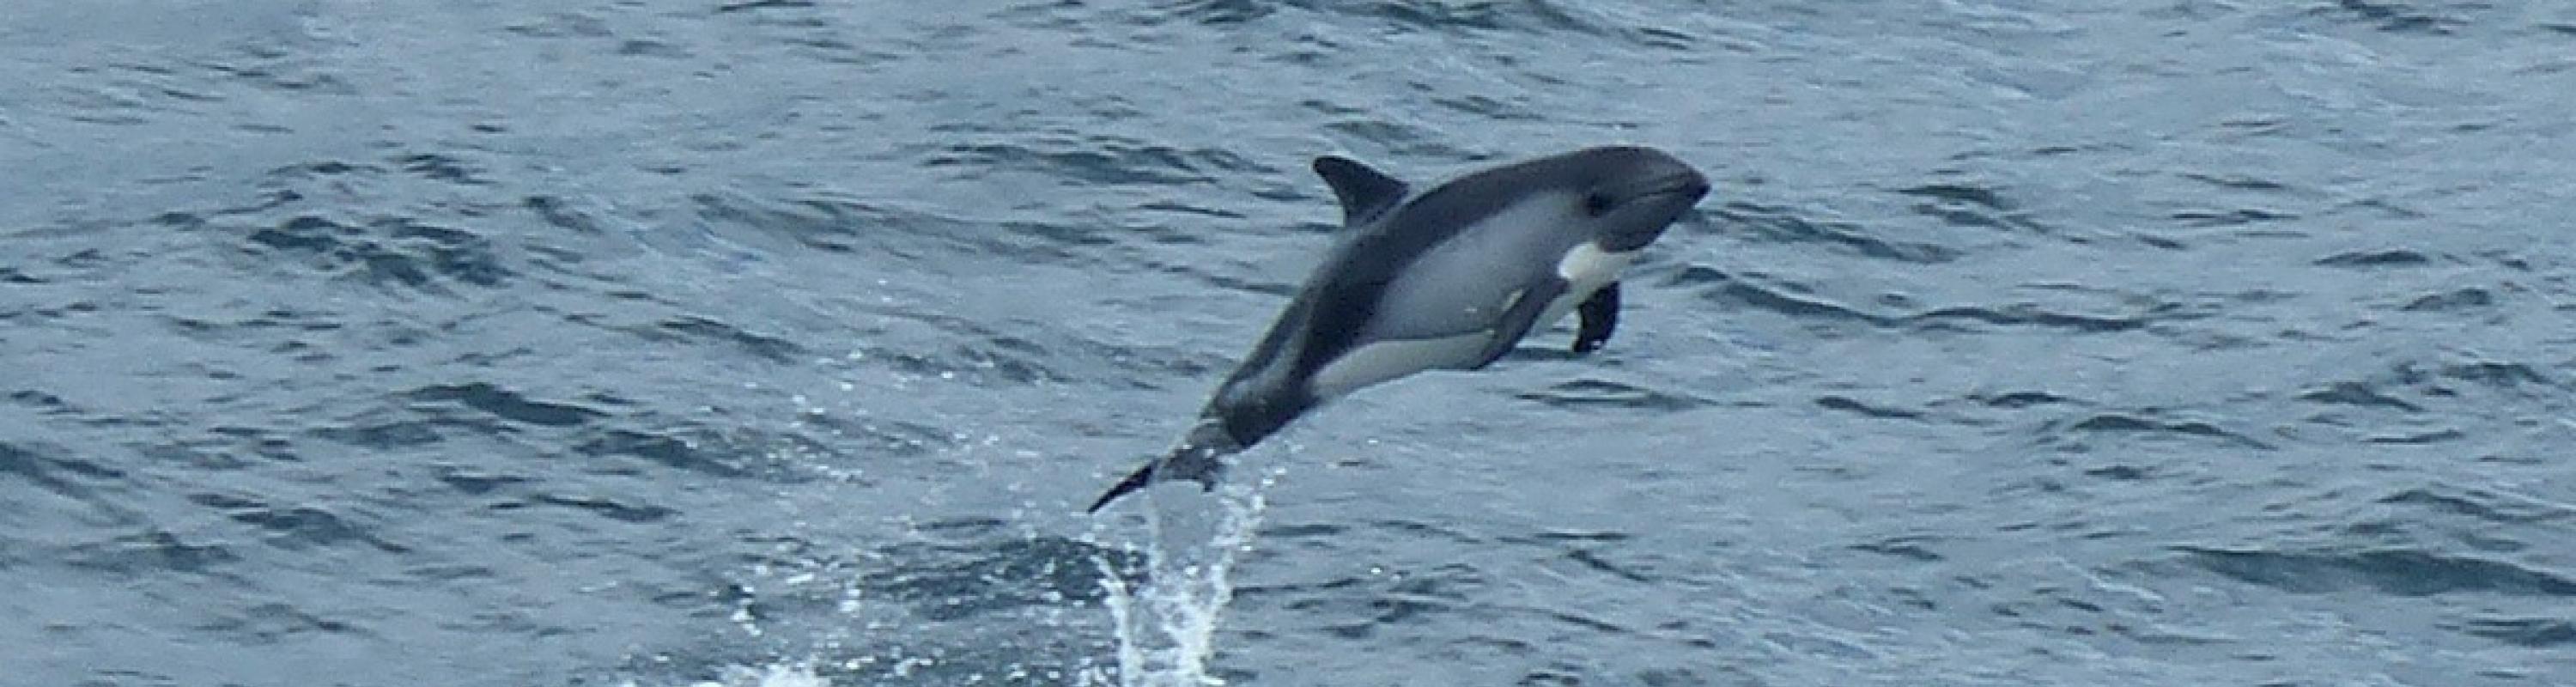 A Peale's dolphin catching some air near the bow of the ship. 